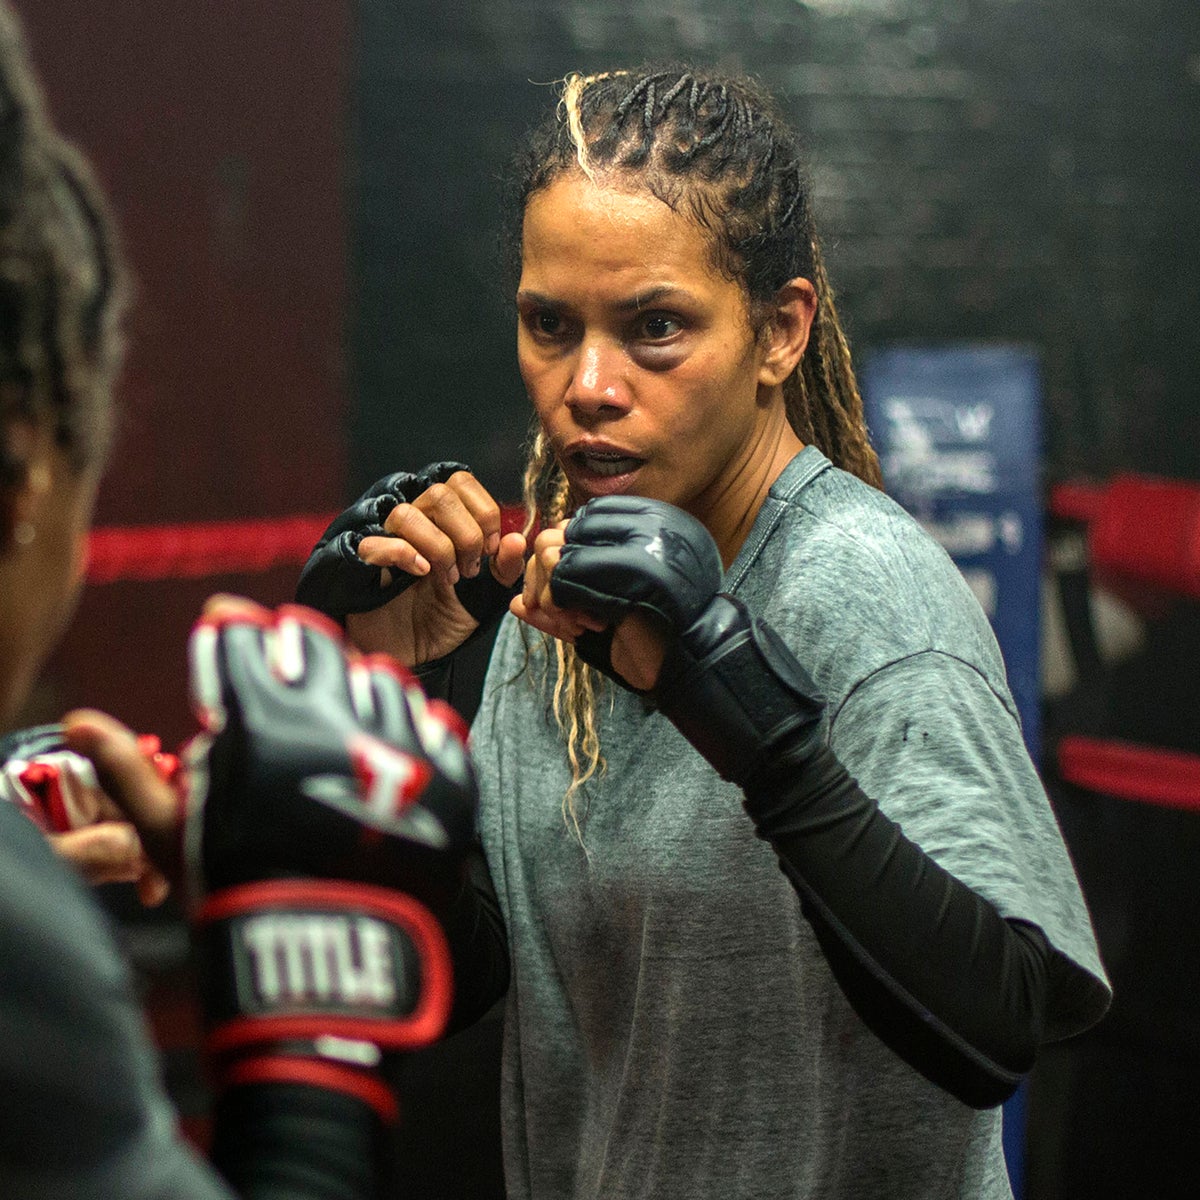 Halle Berry as a beaten-down MMA fighter? Spot the similarity